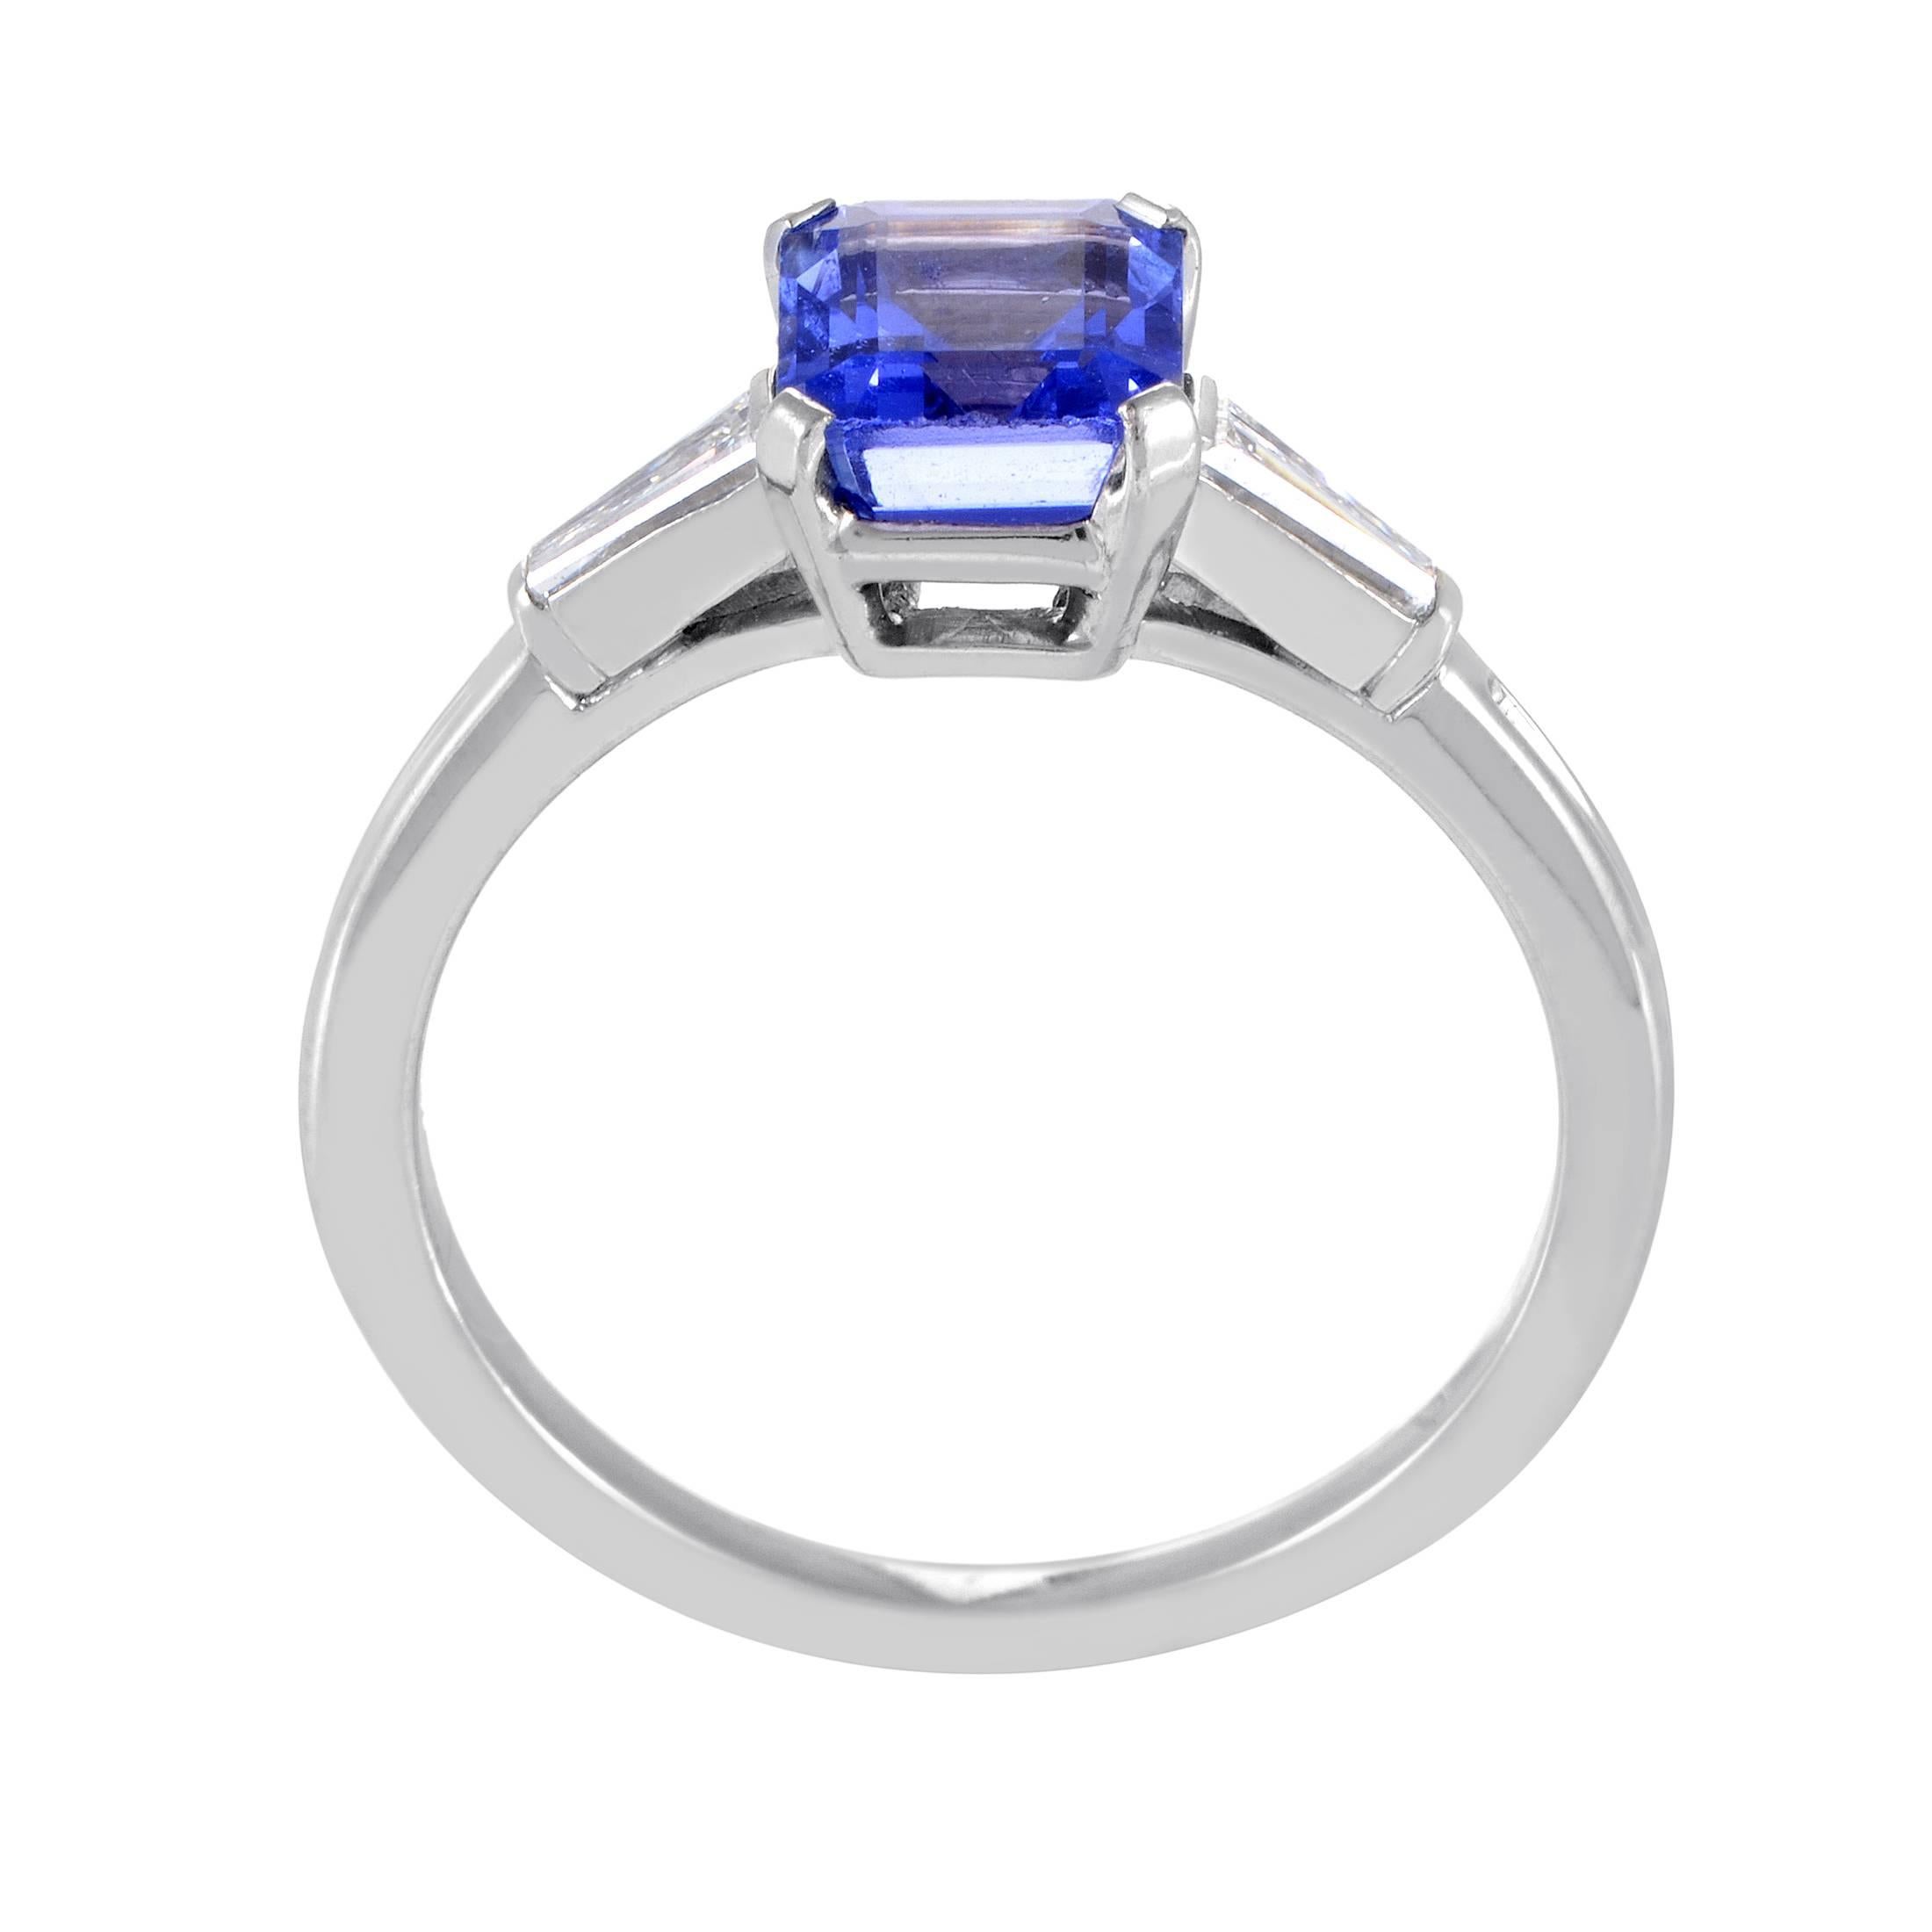 Exuding prestigious excellence and tasteful elegance with its every aspect, this magnificent ring from Tiffany & Co. is made of precious platinum adorned with 0.20ct of sparkling diamonds and topped off with a majestic tanzanite that weighs 1.10